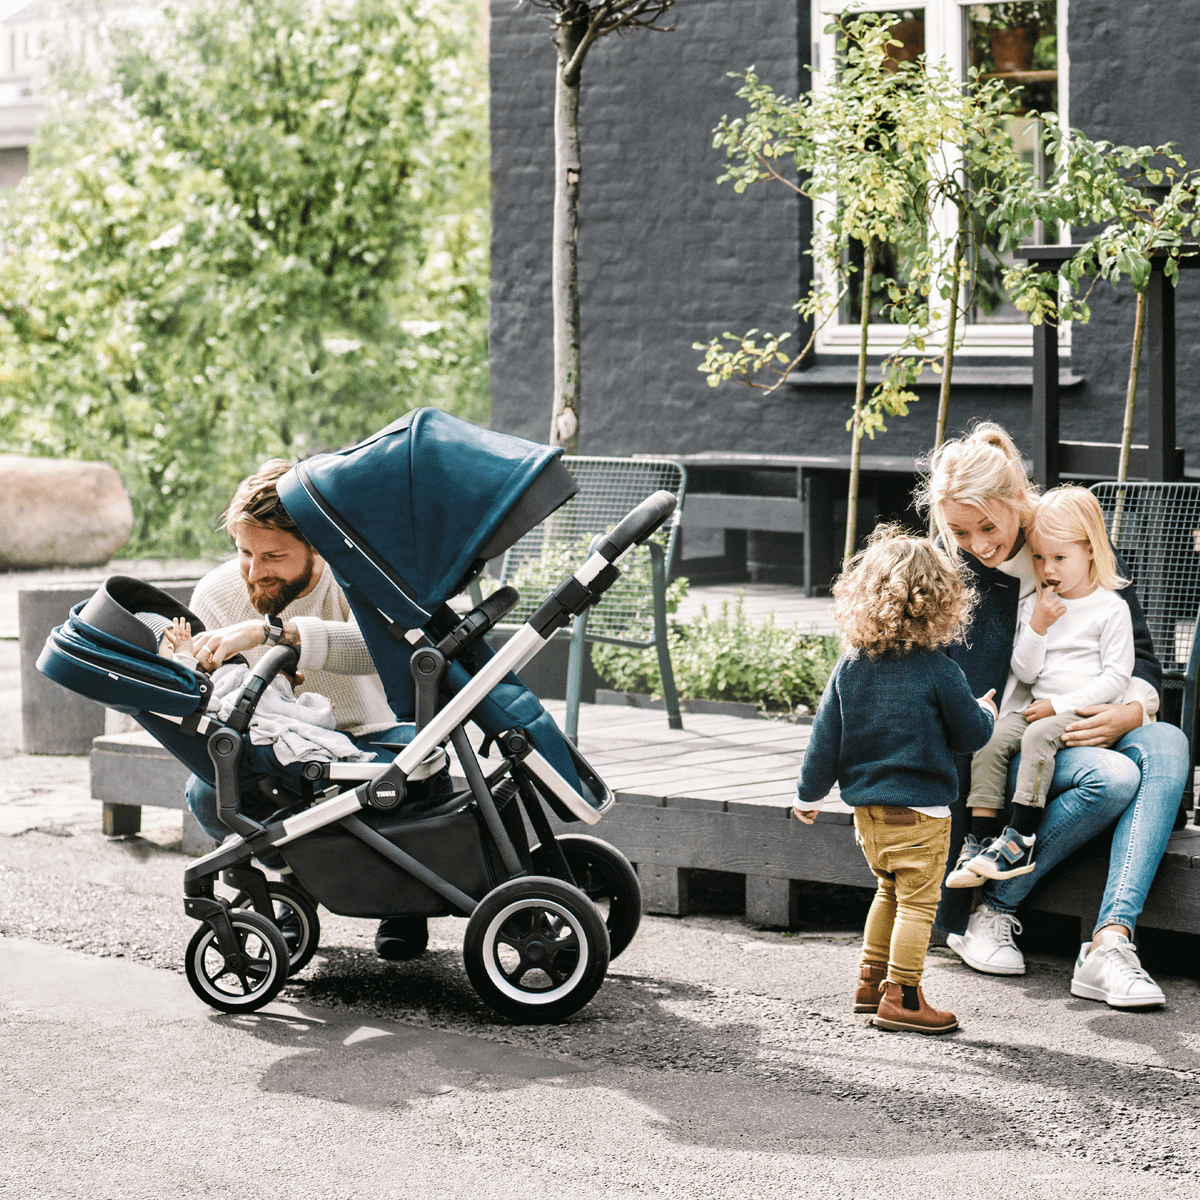 Parents sit in a cafe outside with their kids running around a stroller with a blue Thule Sleek Sibling Seat.